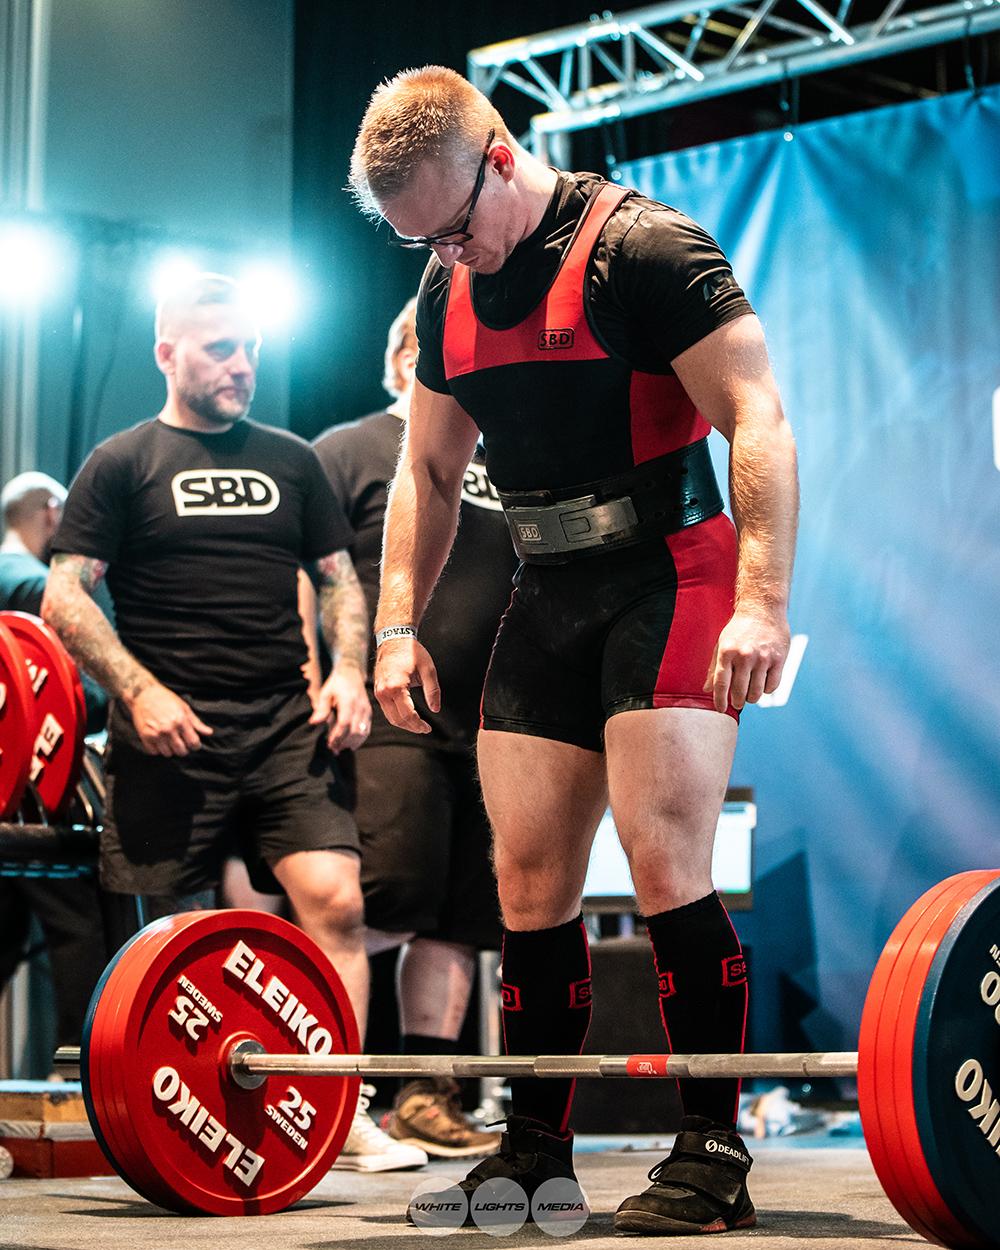 About to deadlift 215, his opening lift